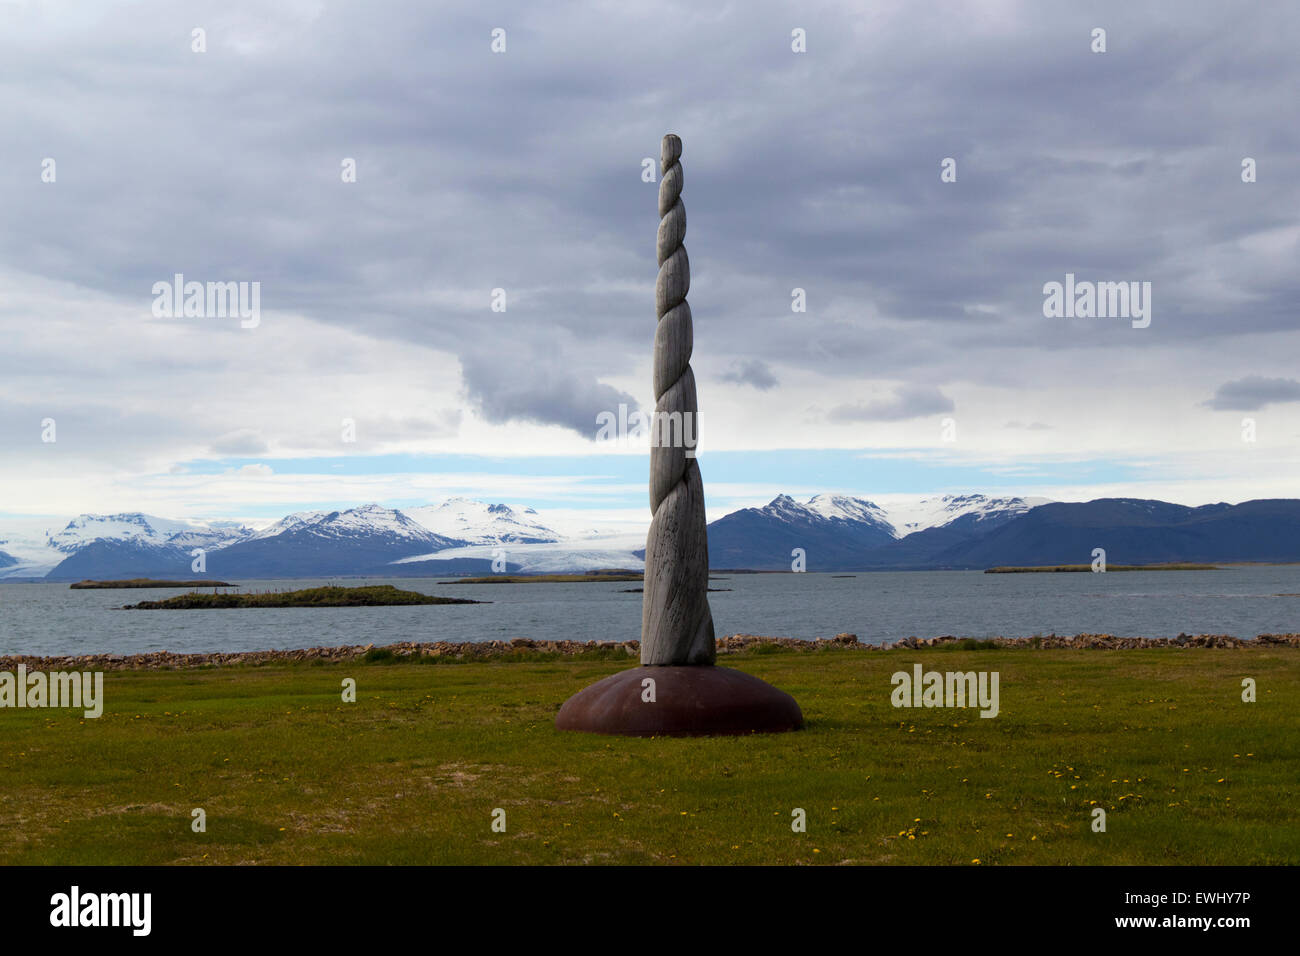 narwhal horn tusk shaped wooden sculpture on the seafront at Hofn Iceland Stock Photo